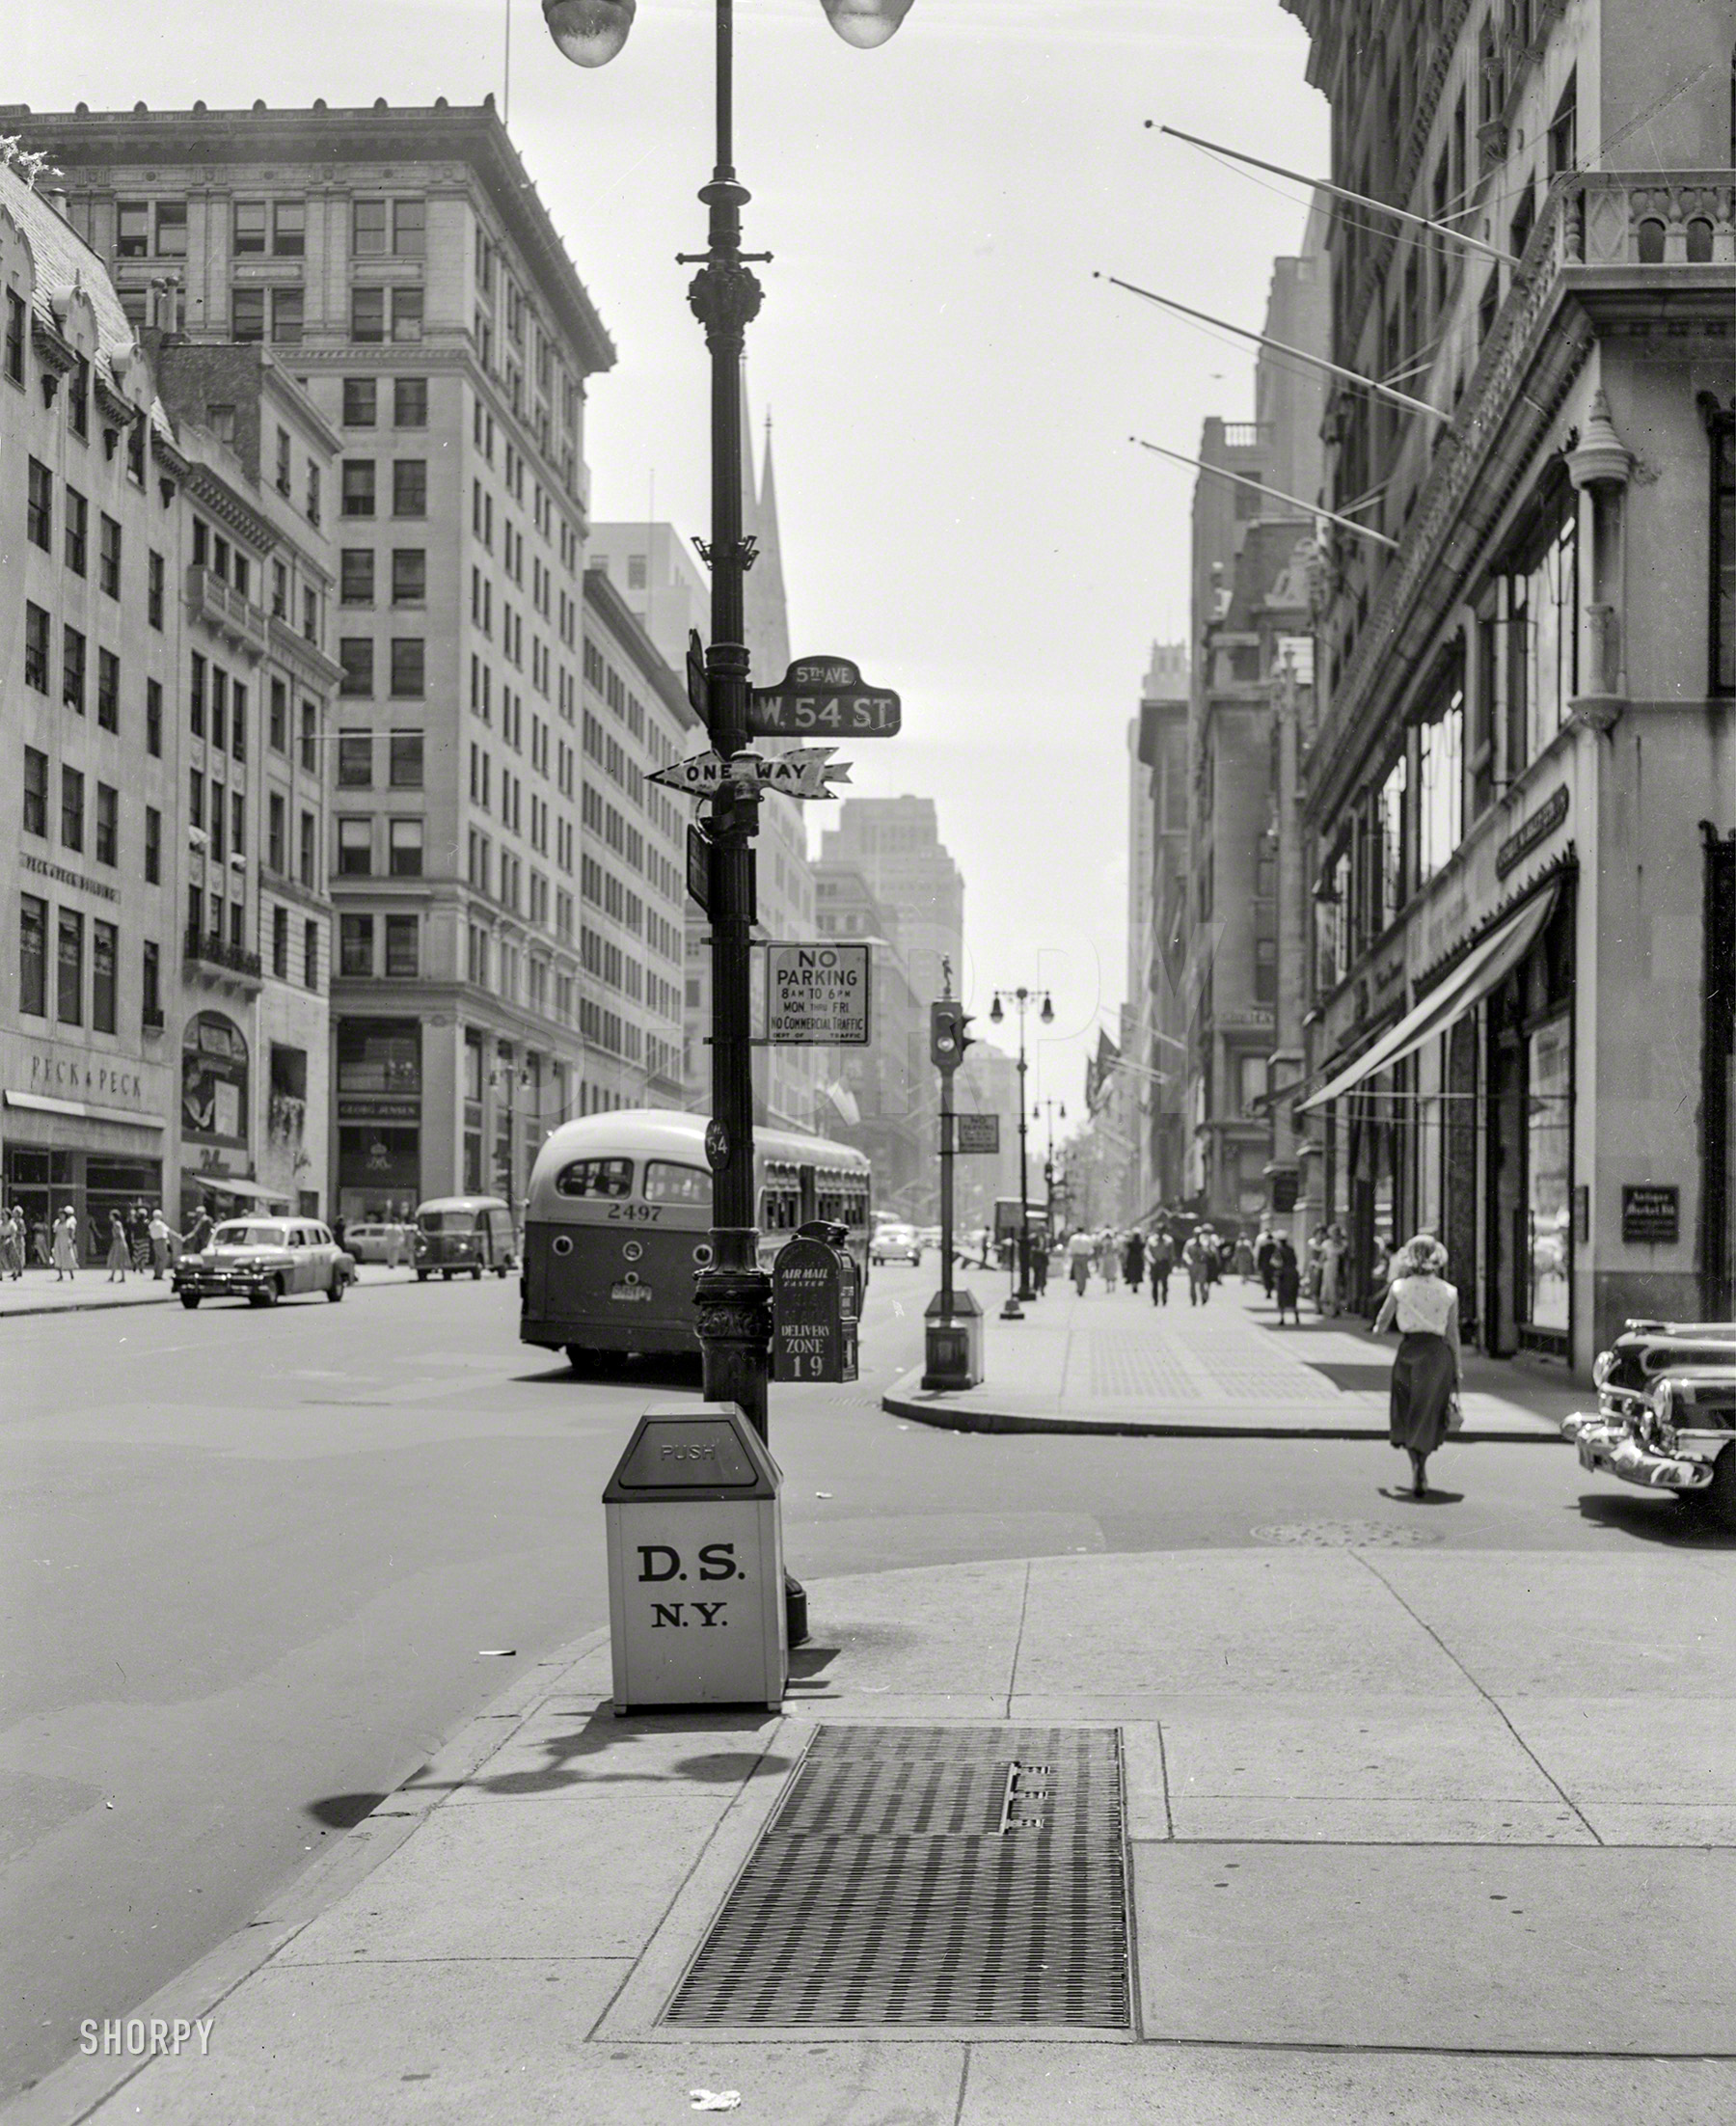 July 1953. "Fifth Avenue at W. 54th Street." And, according to the lamppost mailbox, Delivery Zone 19. 4x5 negative from the News Archive. View full size.